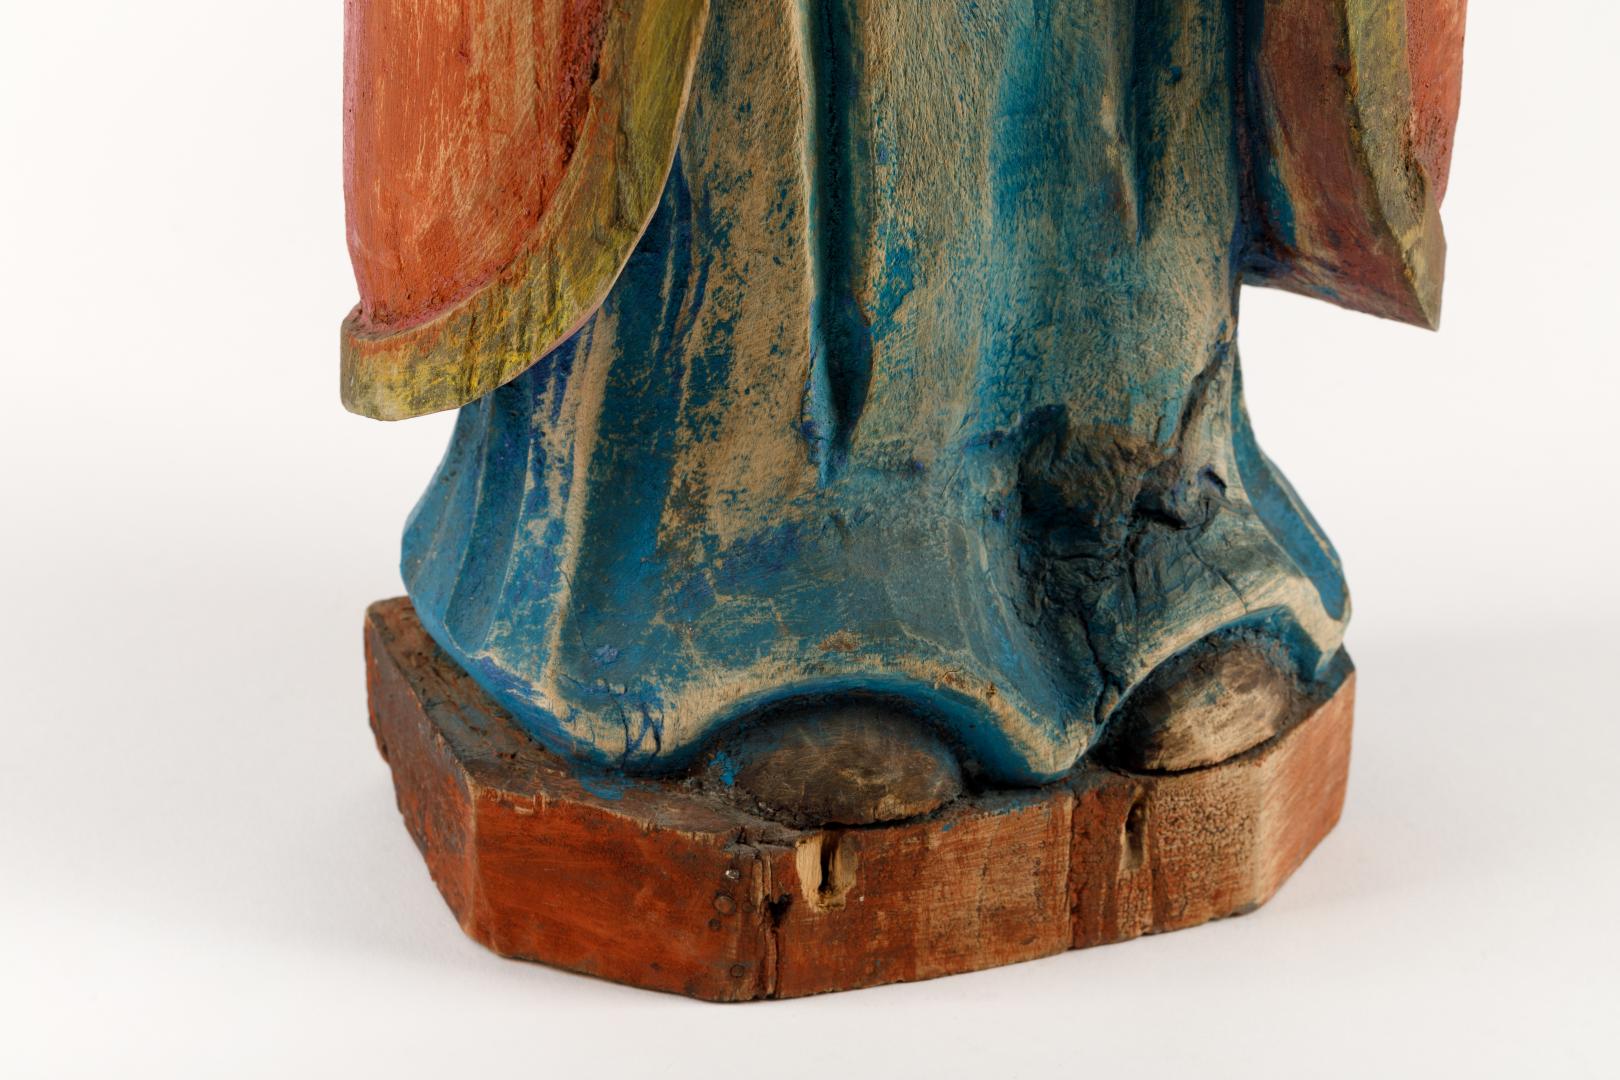 Wooden sculpture of the Virgin Mary